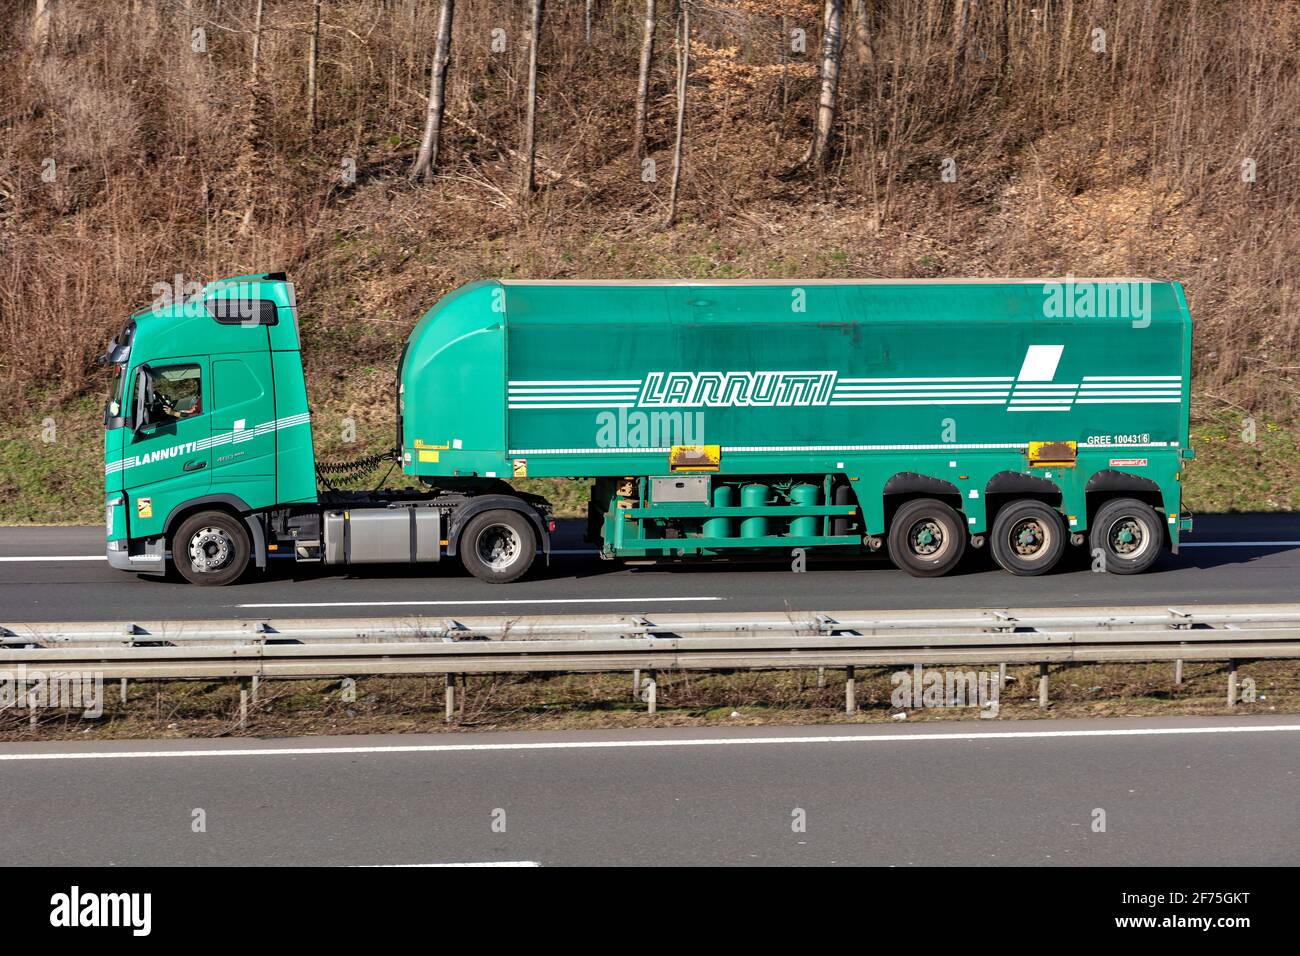 Lannutti Volvo FH truck with glass inloader trailer on motorway. Stock Photo